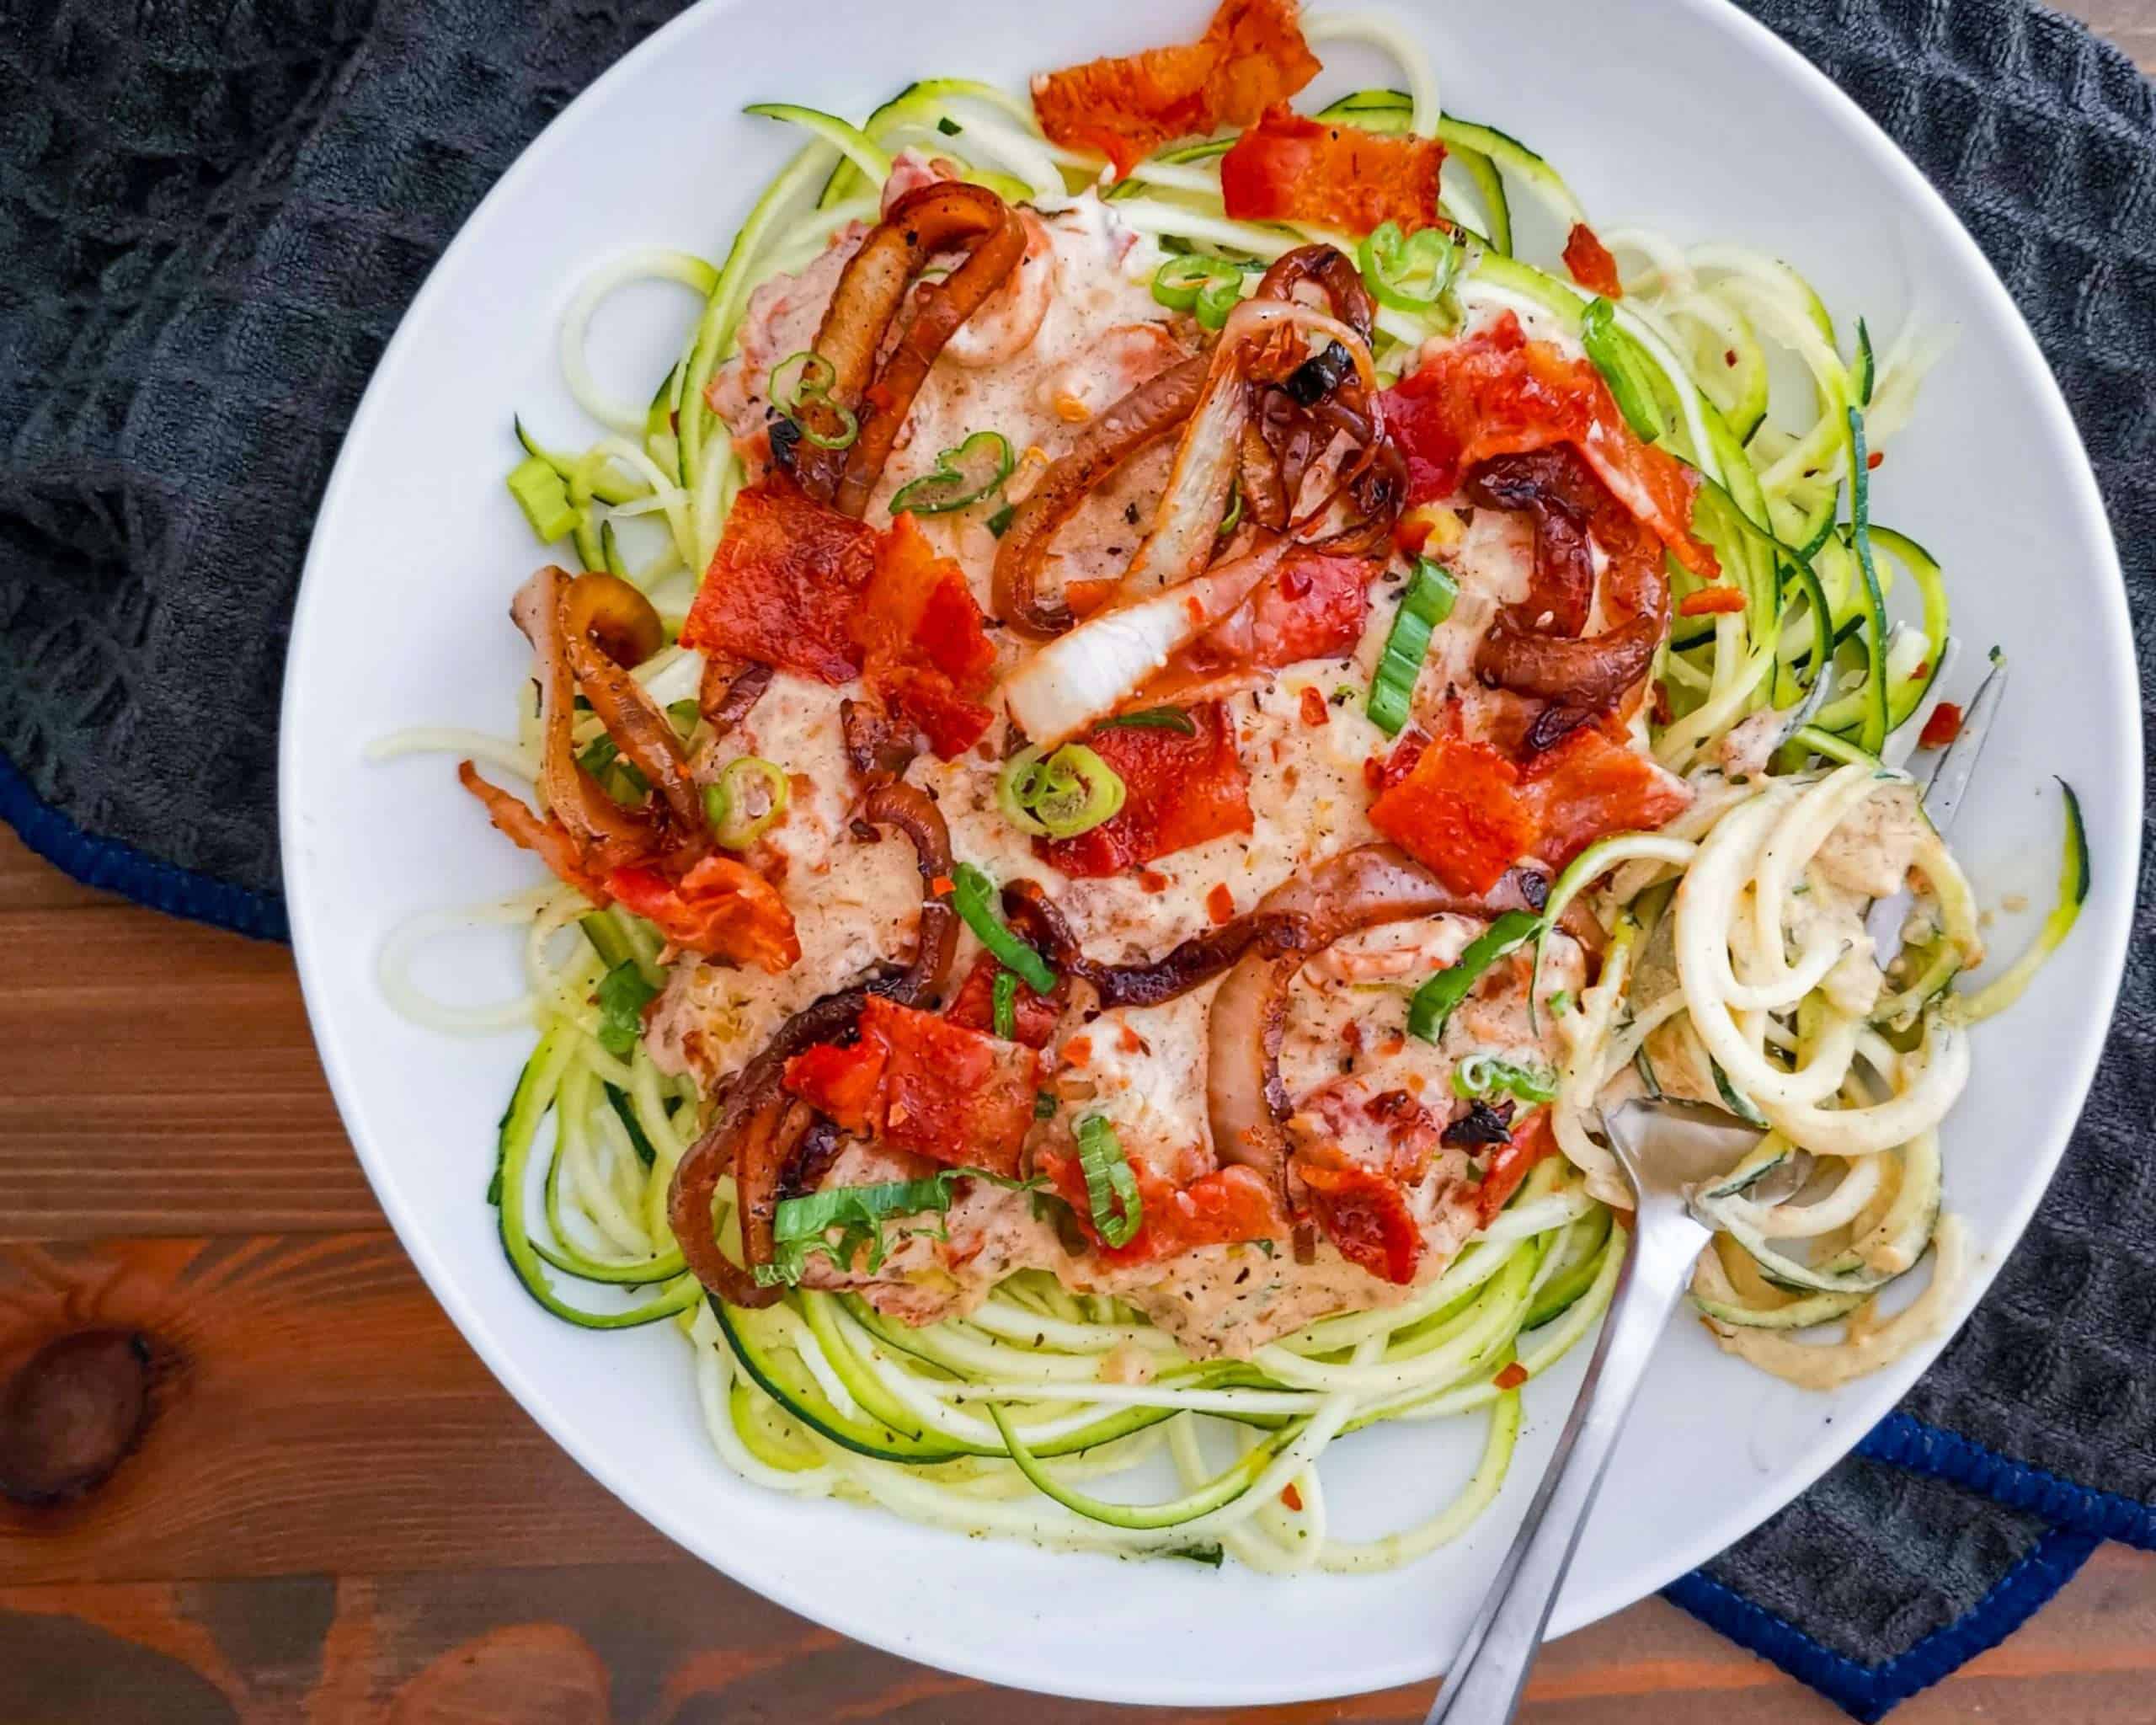 Sour Cream and onions Sauce with Zoodles